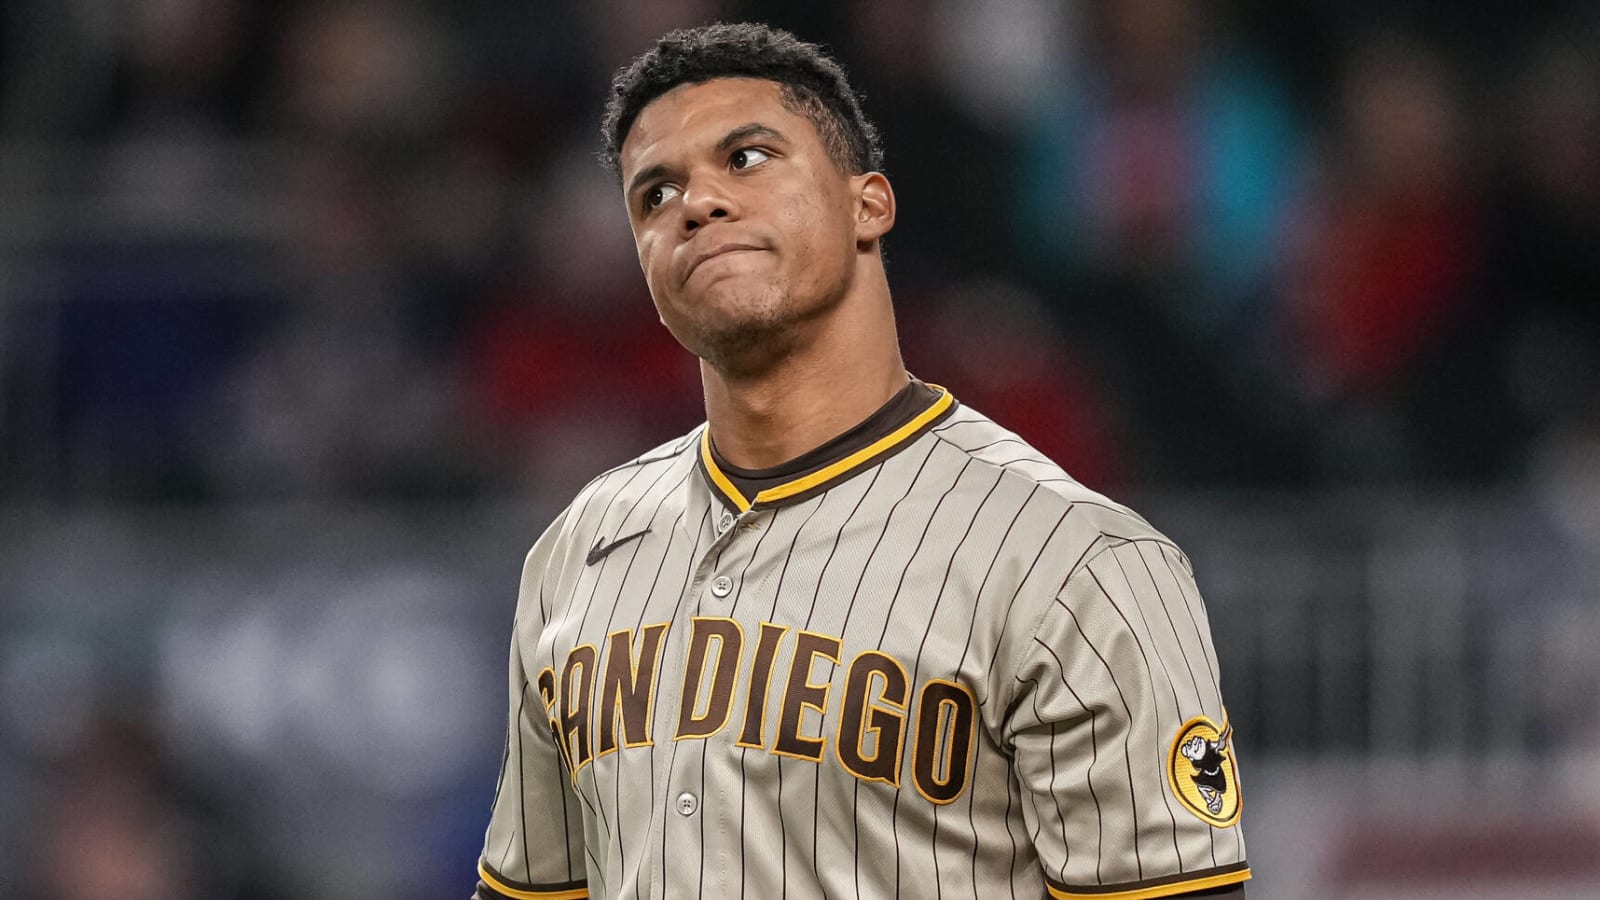 Juan Soto trade not off the table, says Padres GM, but extension